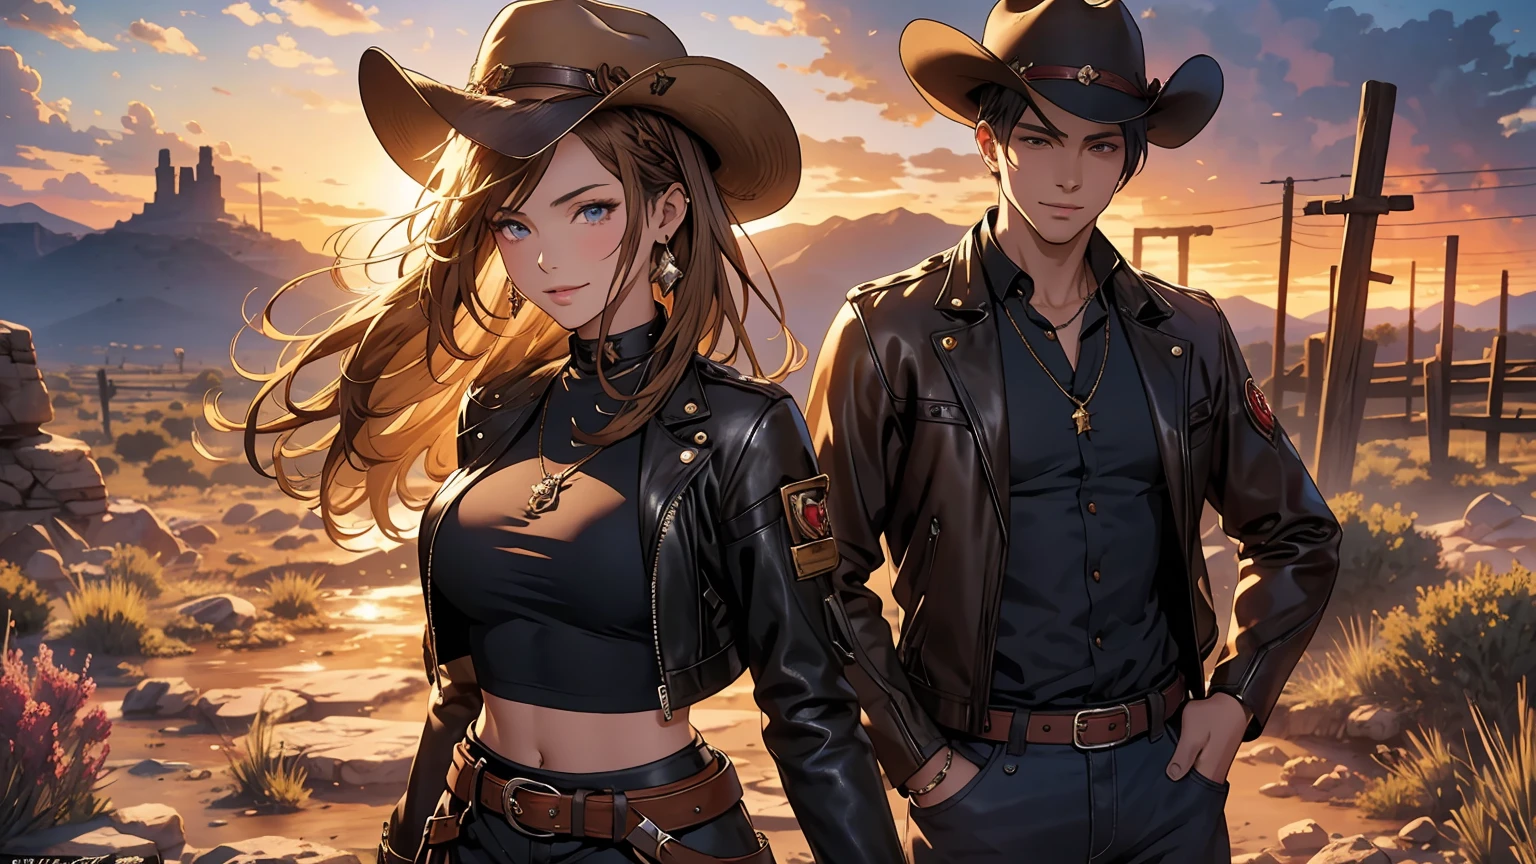 Arte de anime Genshin Impact: ((masterpiece: 1.2, 16k, super detail, best quality, accurate, high resolution, high quality)), (Wallpaper), Young cute cowgirl, age 18, super model, smiling, short brown leather jacket with open front, cowboy belt, brown cowboy hat, leather boots, braided hair, elegant posture, elegant cowgirl in the spotlight, illustrative style inspiration from the Charles Marion Russell, , strength, confidence, full body portrait, standing, top model pose, seductive expression, Full breasts, Tight shirt, Midriff, beautiful latin girl, looking at the spectators, beautiful and charming girl, perfect clean model face, exquisite facial features, detailed face, clear facial expressions, long wavy hair, gradient hair, beautiful detailed eyes, piercing and enchanting eyes, luscious lips, beautiful detailed glossy lips, rosy cheek, enchanting smile, perfect body, slim waist, dynamic poses, solo girl, wild west setting, plain of the American West, wide and warm old sky, the sunset, a desert with dry soil and sparse thorn trees, rocky mountains, winding river with vegetation on the banks, rusty railway track, rock formations, ruins of a miner's cabin, dilapidated railroad, complex background, very detailed illustration, Ultra-detailed CG, professional art, vibrant appearance, raw photo, (a majestic vision), (dramatic photo:1.4), cinematic, (HDR:1.5), (intricate details:1.1), natural colors, splendid lighting effects, (dramatic light), (Cinematic lighting), epic and surrealistic anime, detailed anime digital art, anime digital art, high-quality anime art style, award winning,